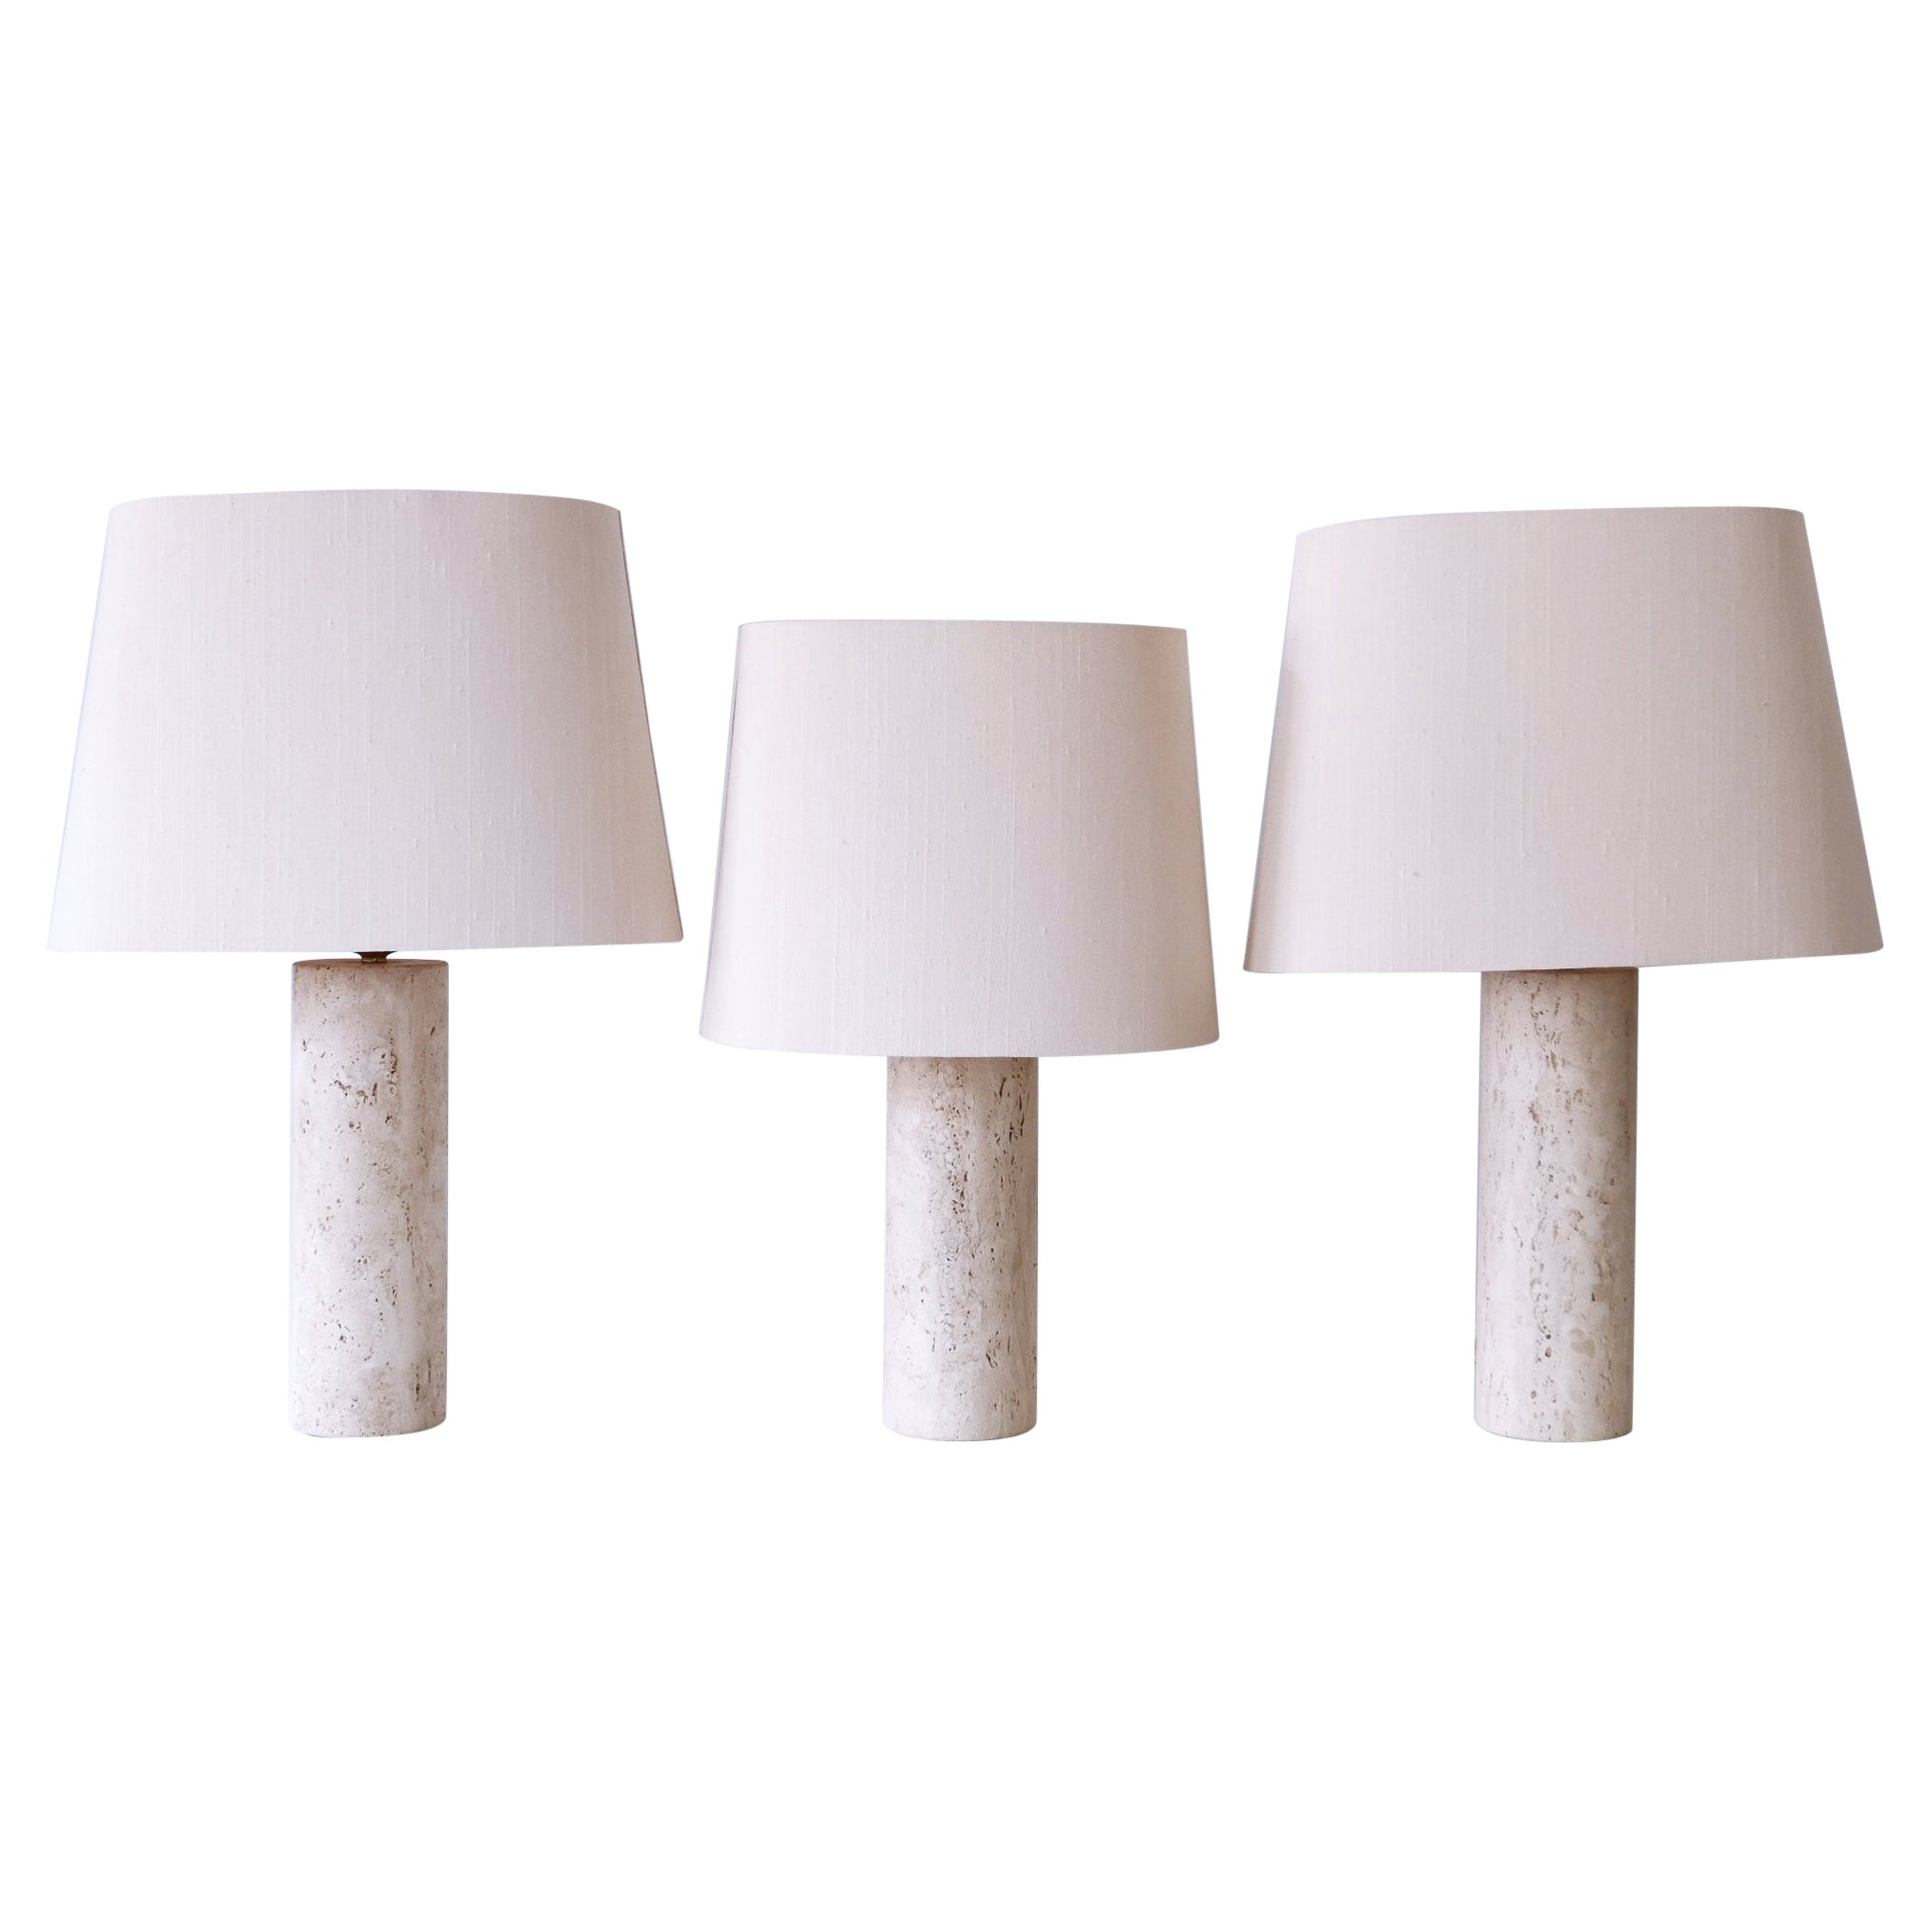 Set of Three Elegant Mid Century Modern Travertine Table Lamps Italy 1960s For Sale